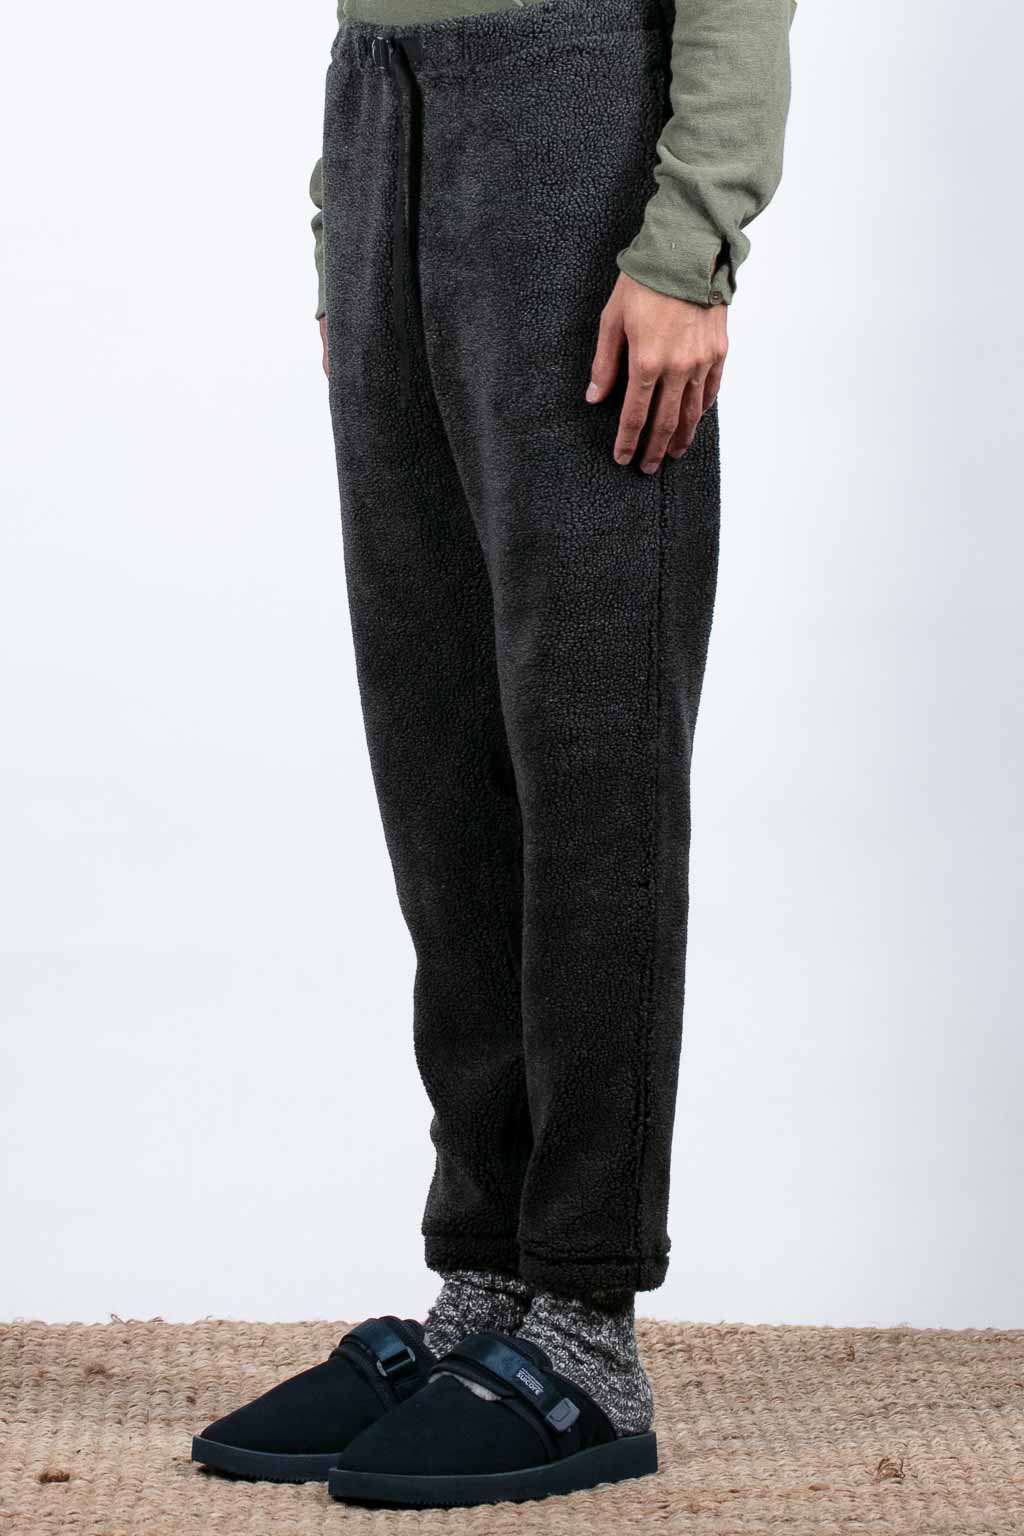 BlueButtonShop - OrSlow - OrSlow-New-Yorker-Charcoal-Grey-03-1002-60